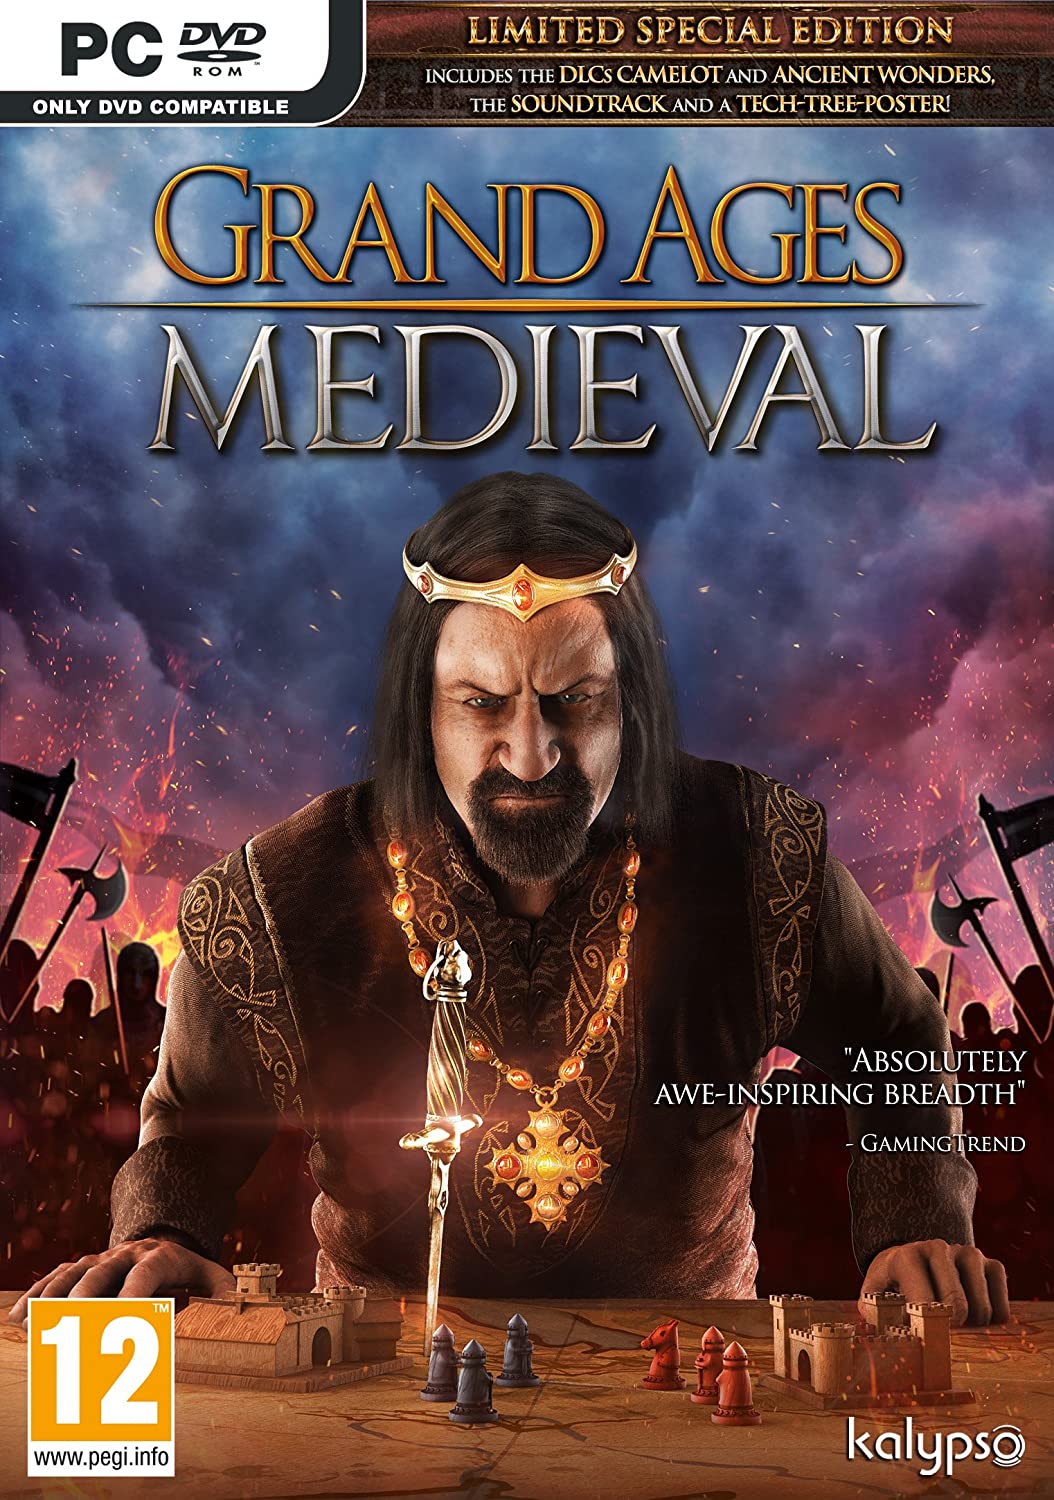 Grand Ages: Medieval – Limited Special Edition PC-DVD